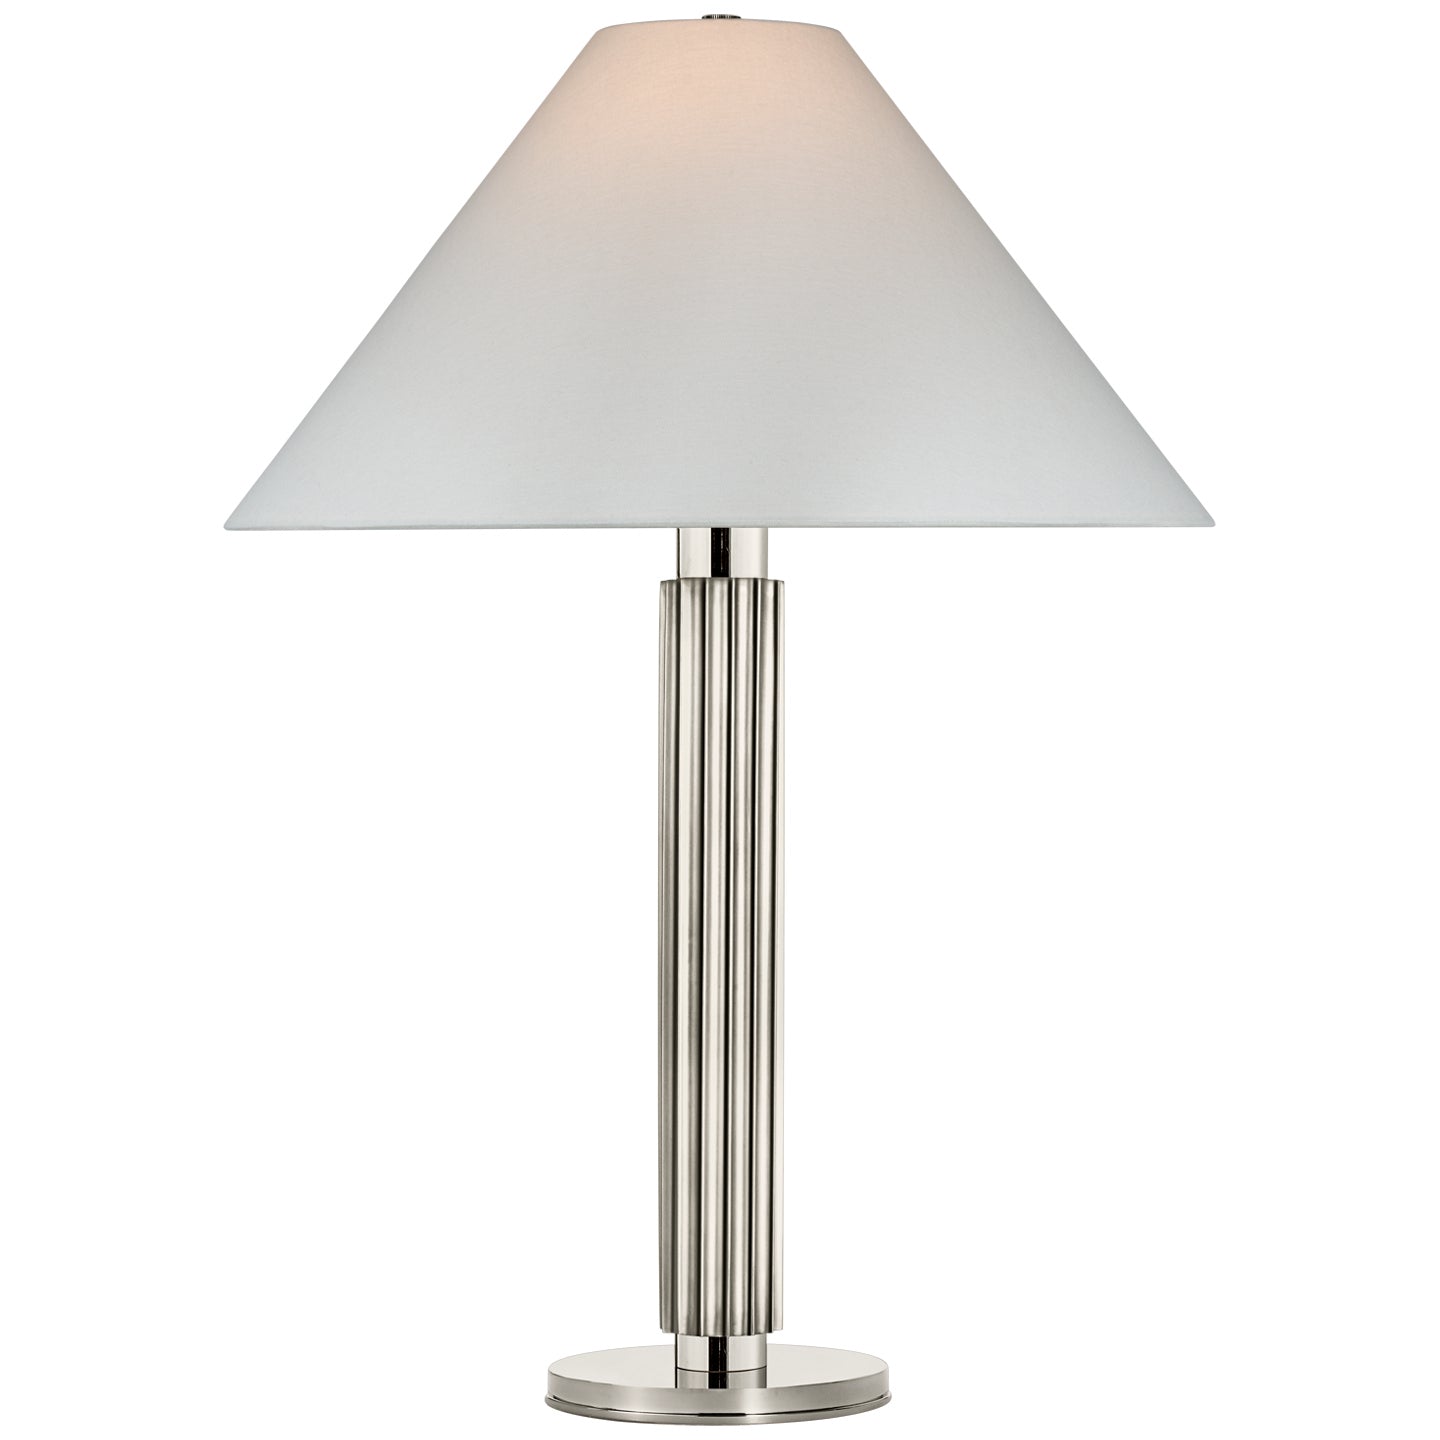 Load image into Gallery viewer, Visual Comfort Signature - S 3115PN-L - LED Table Lamp - Durham - Polished Nickel
